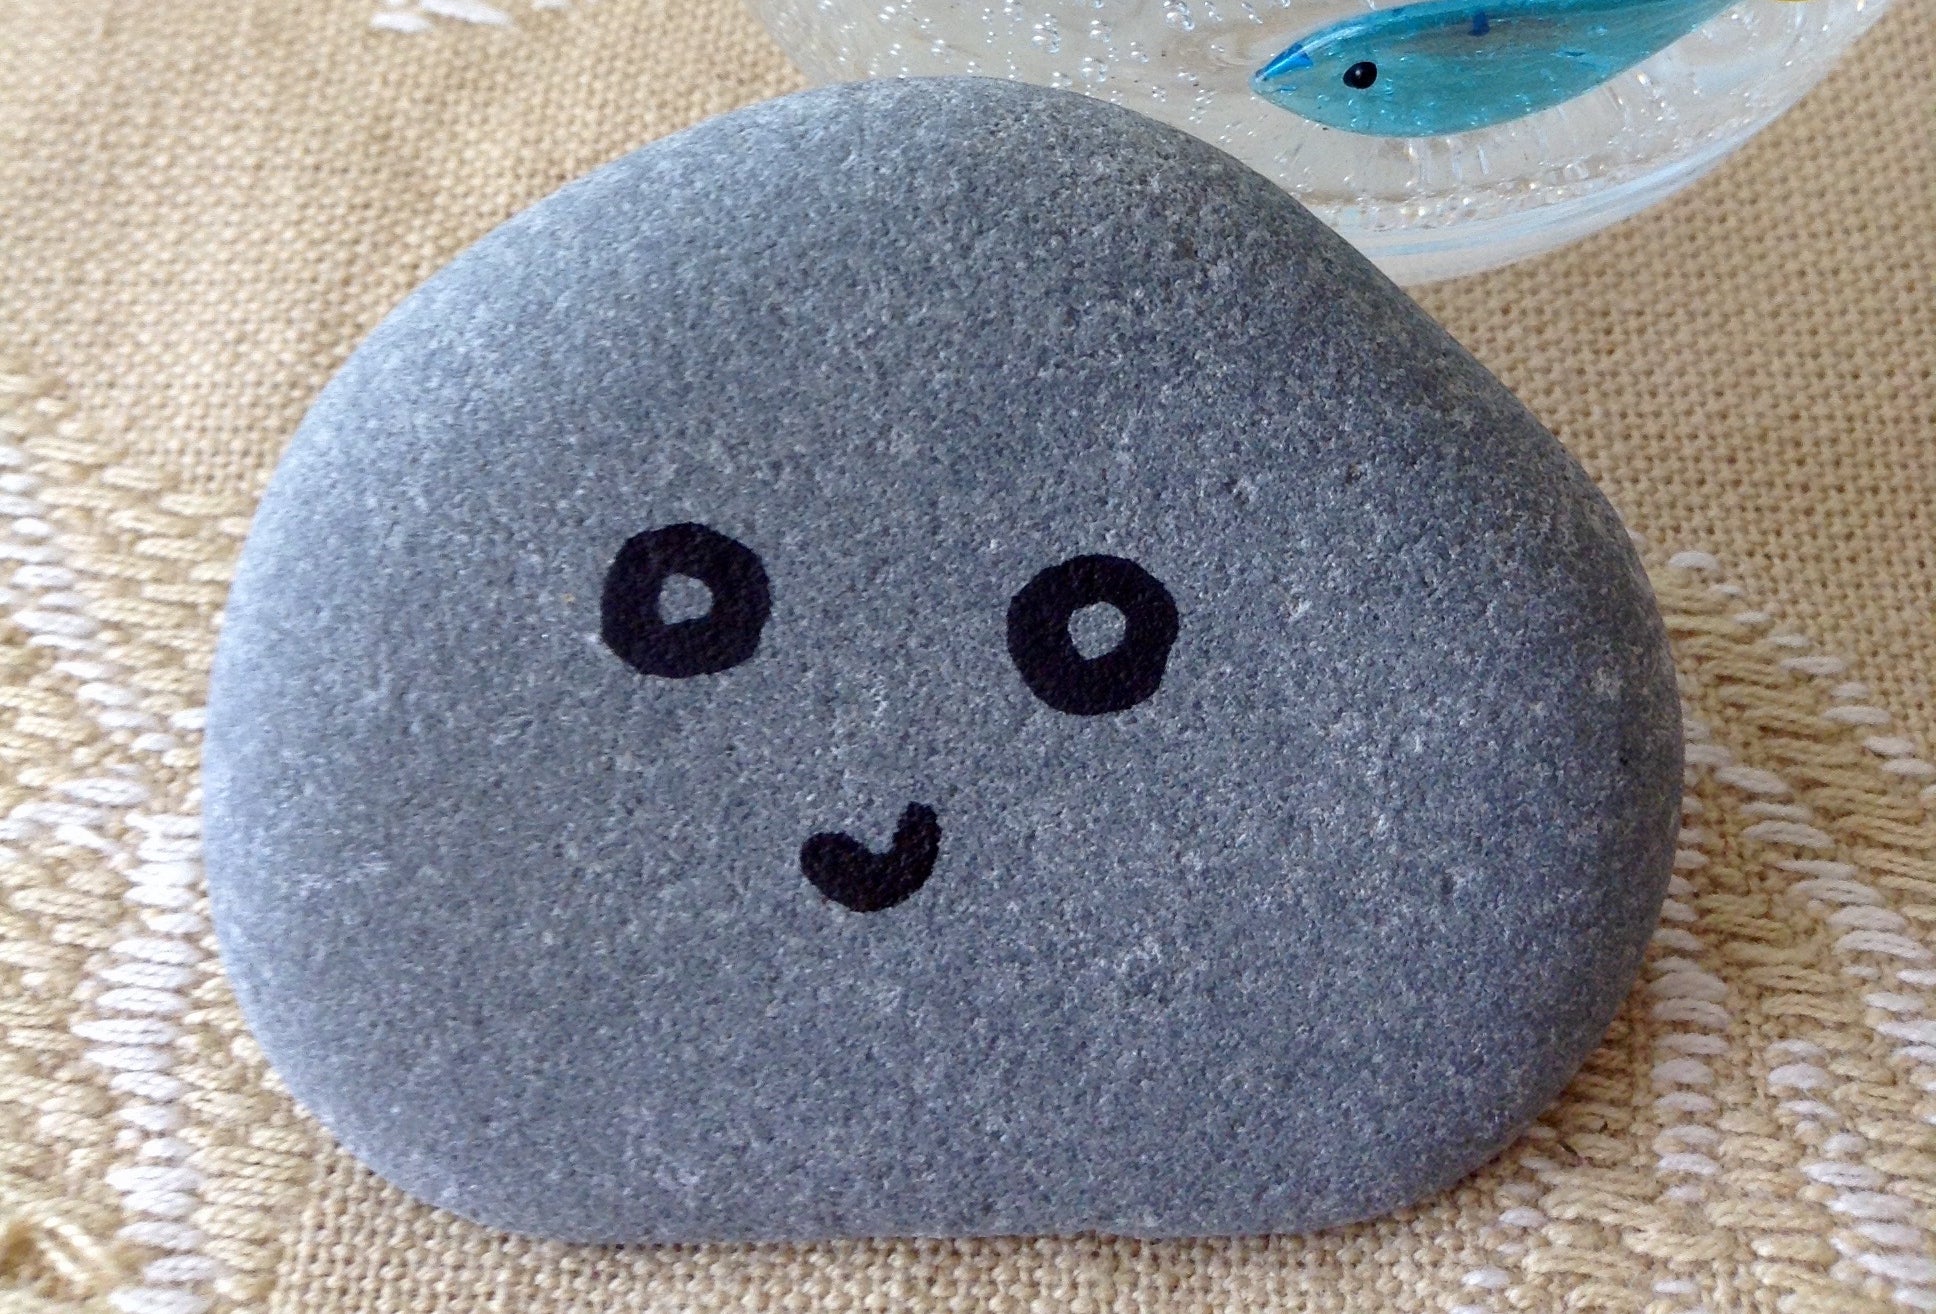 A smooth stone with a drawn-on cute face rests on a textured surface near a clear glass with fish designs